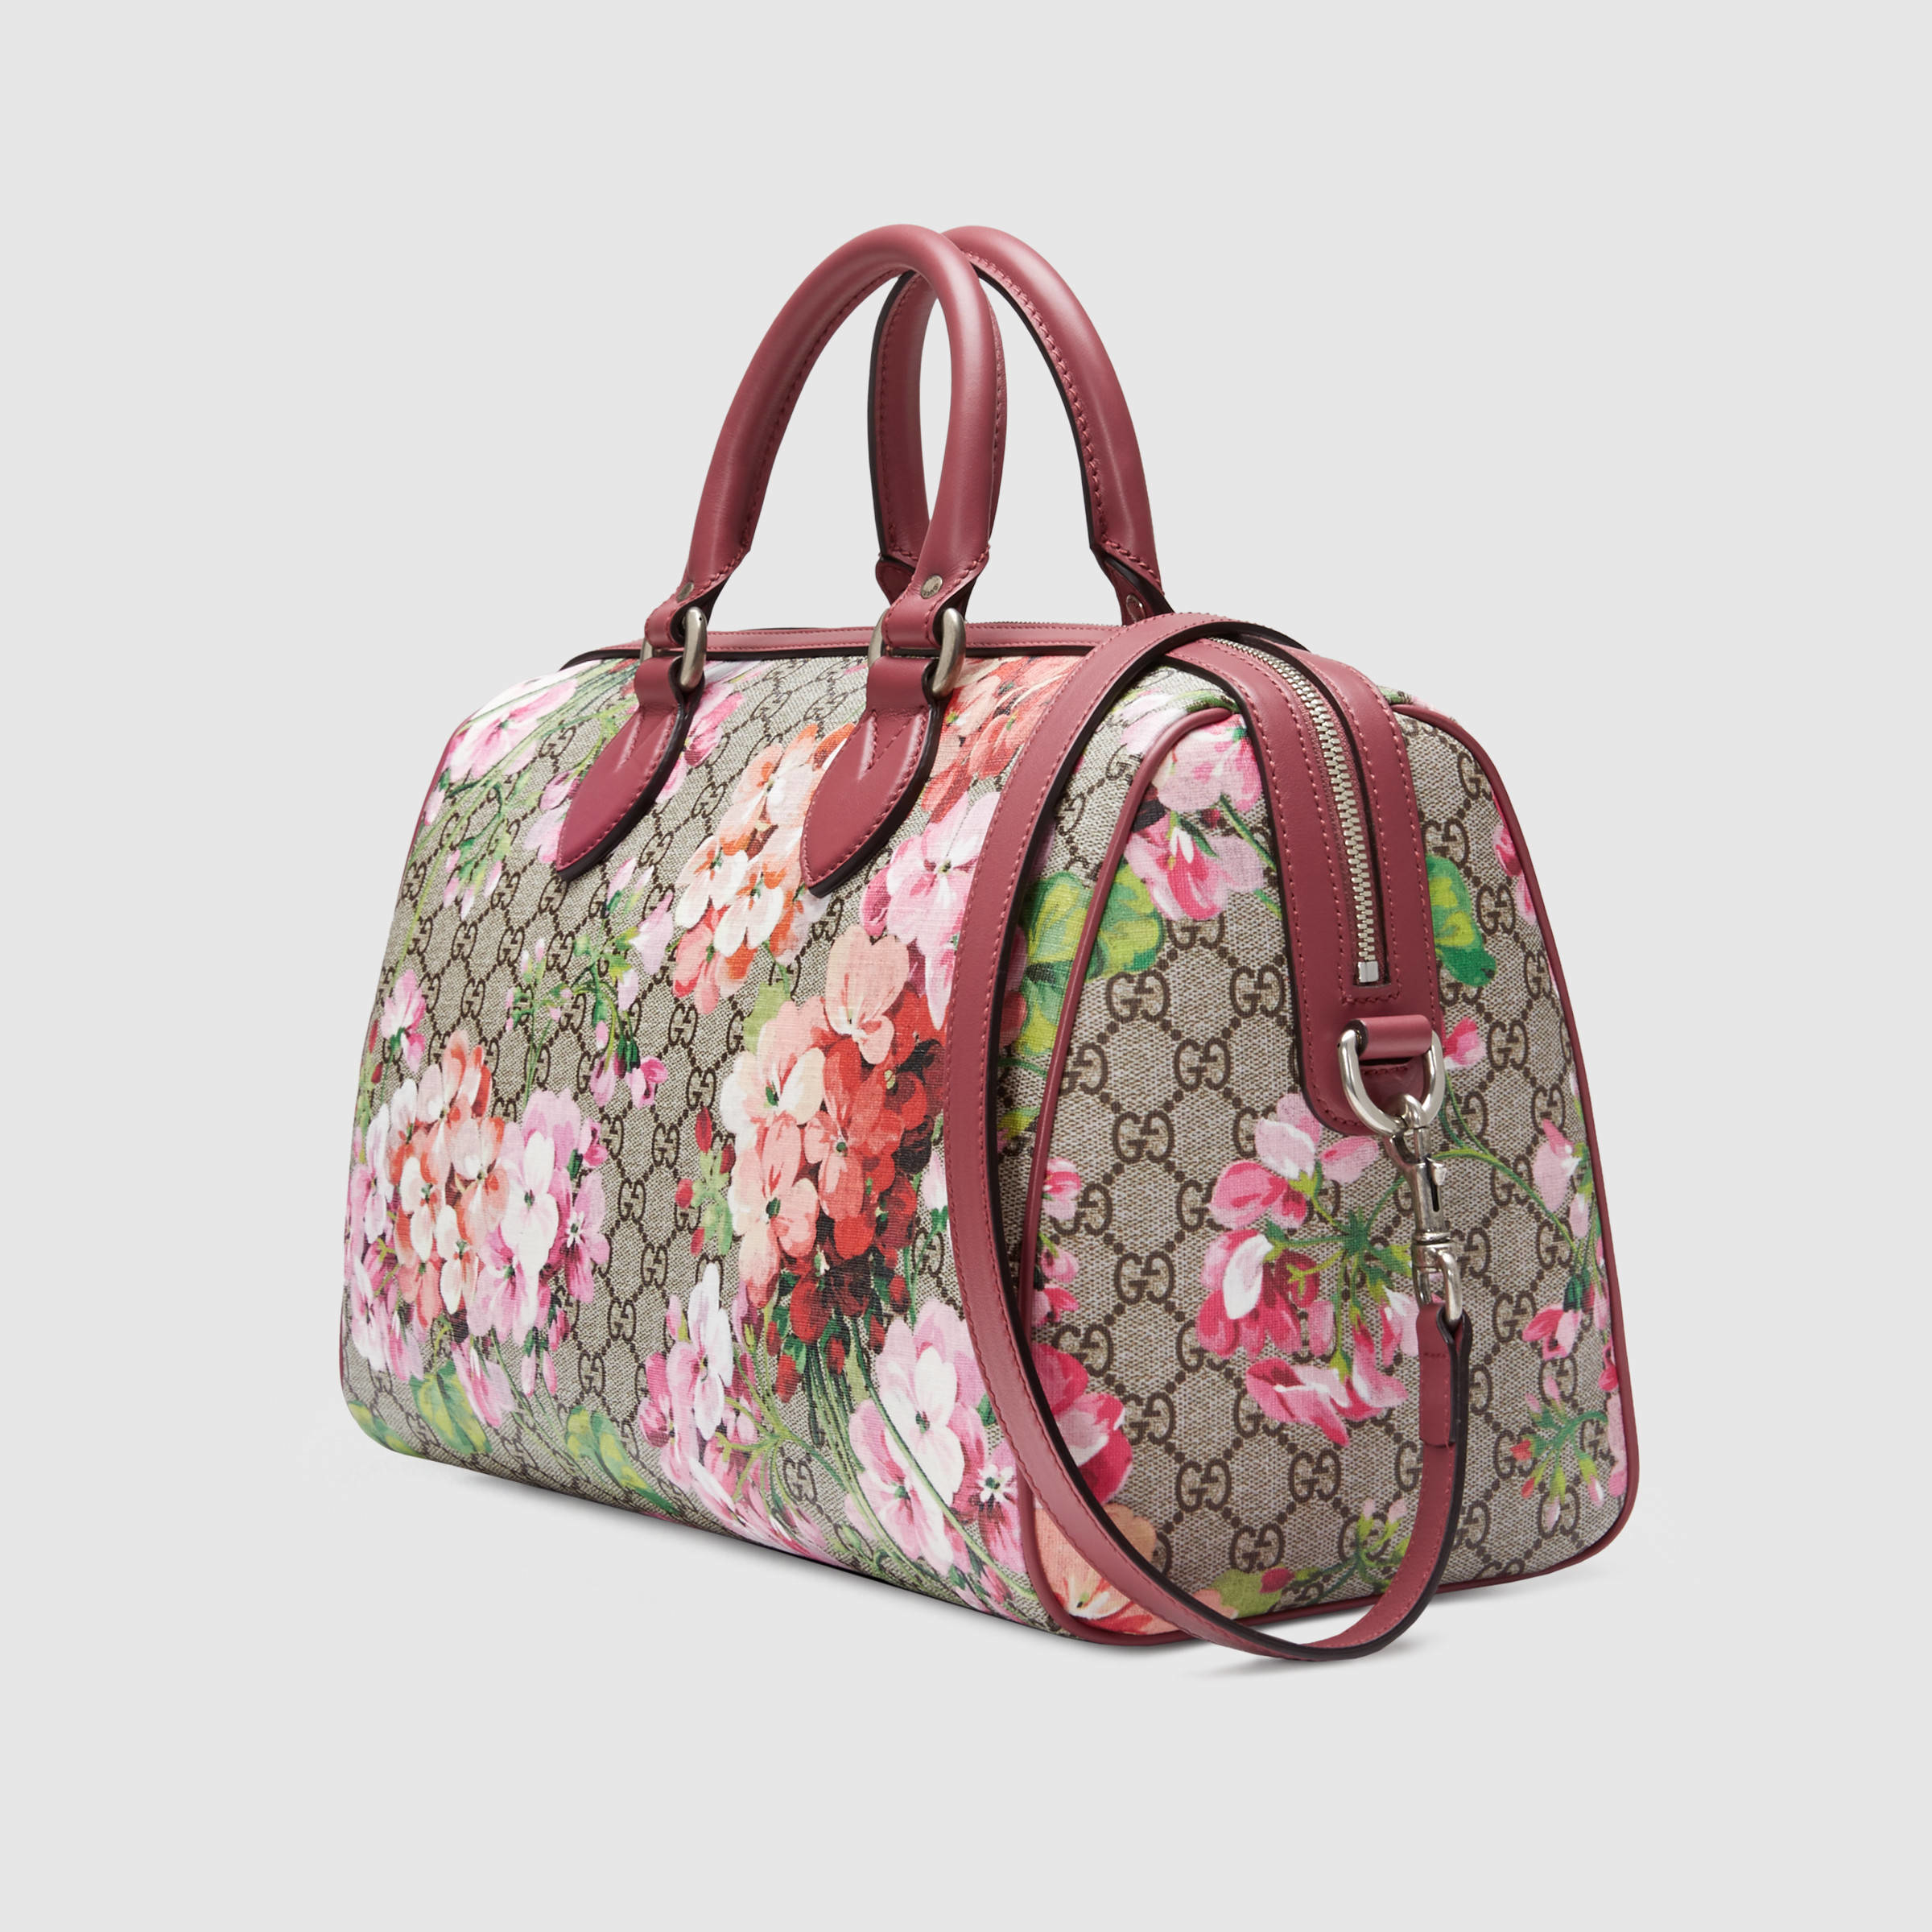 Gucci Blooms Gg Supreme Top Handle Bag in Pink | Lyst